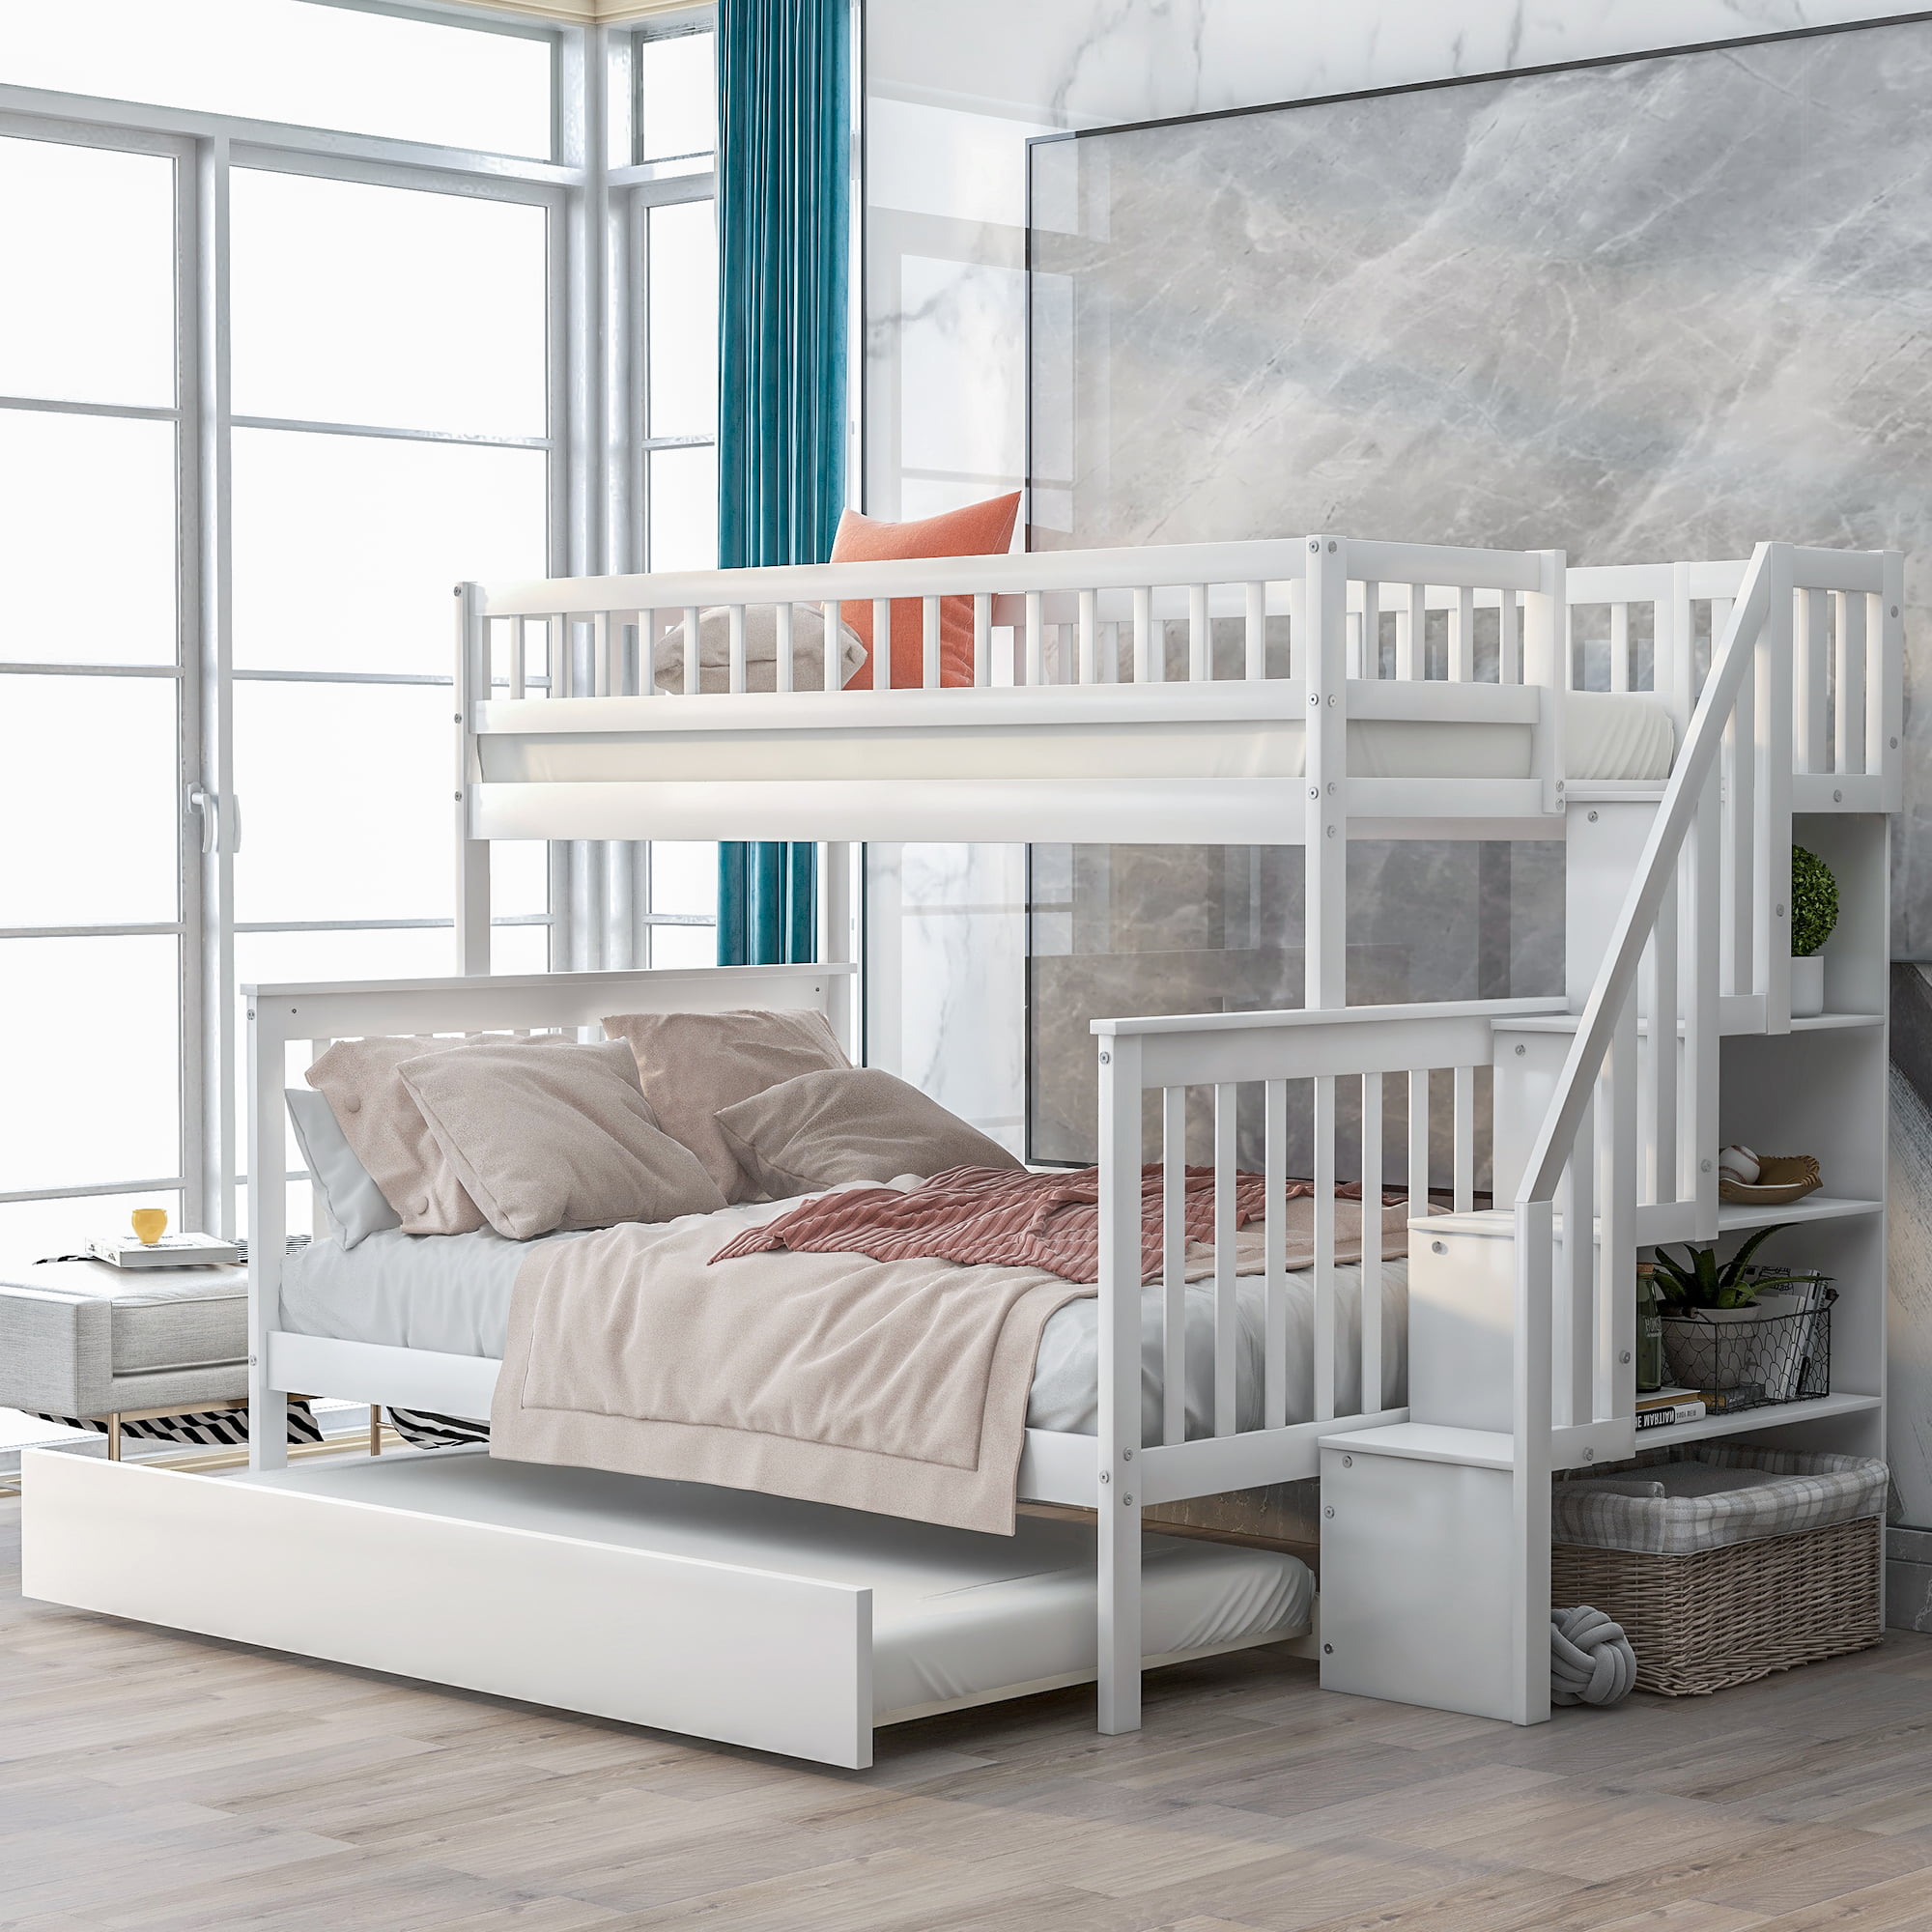 Solid Wood Bunk Bed Twin Over Full, Solid Wood Twin Over Full Bunk Bed With Stairs And Storage